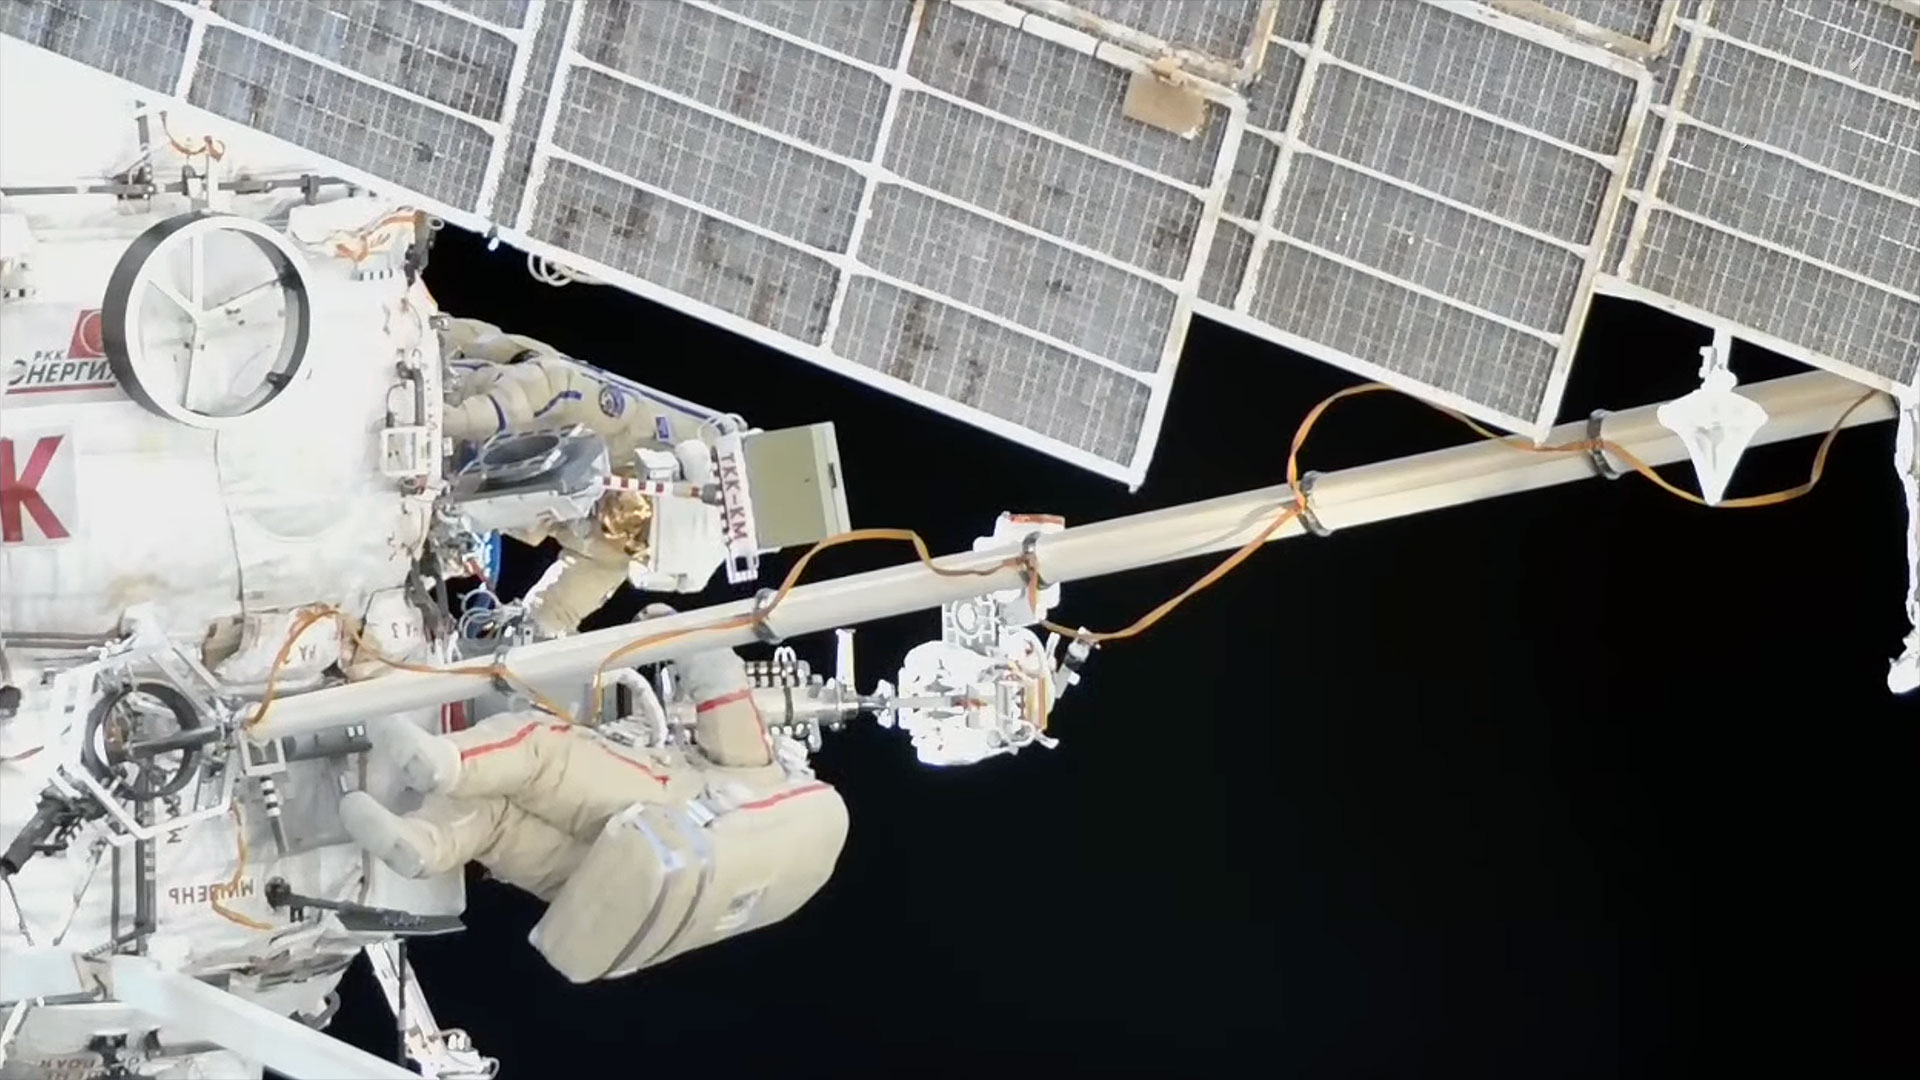 Russian cosmonauts make quick work of space station spacewalk Space